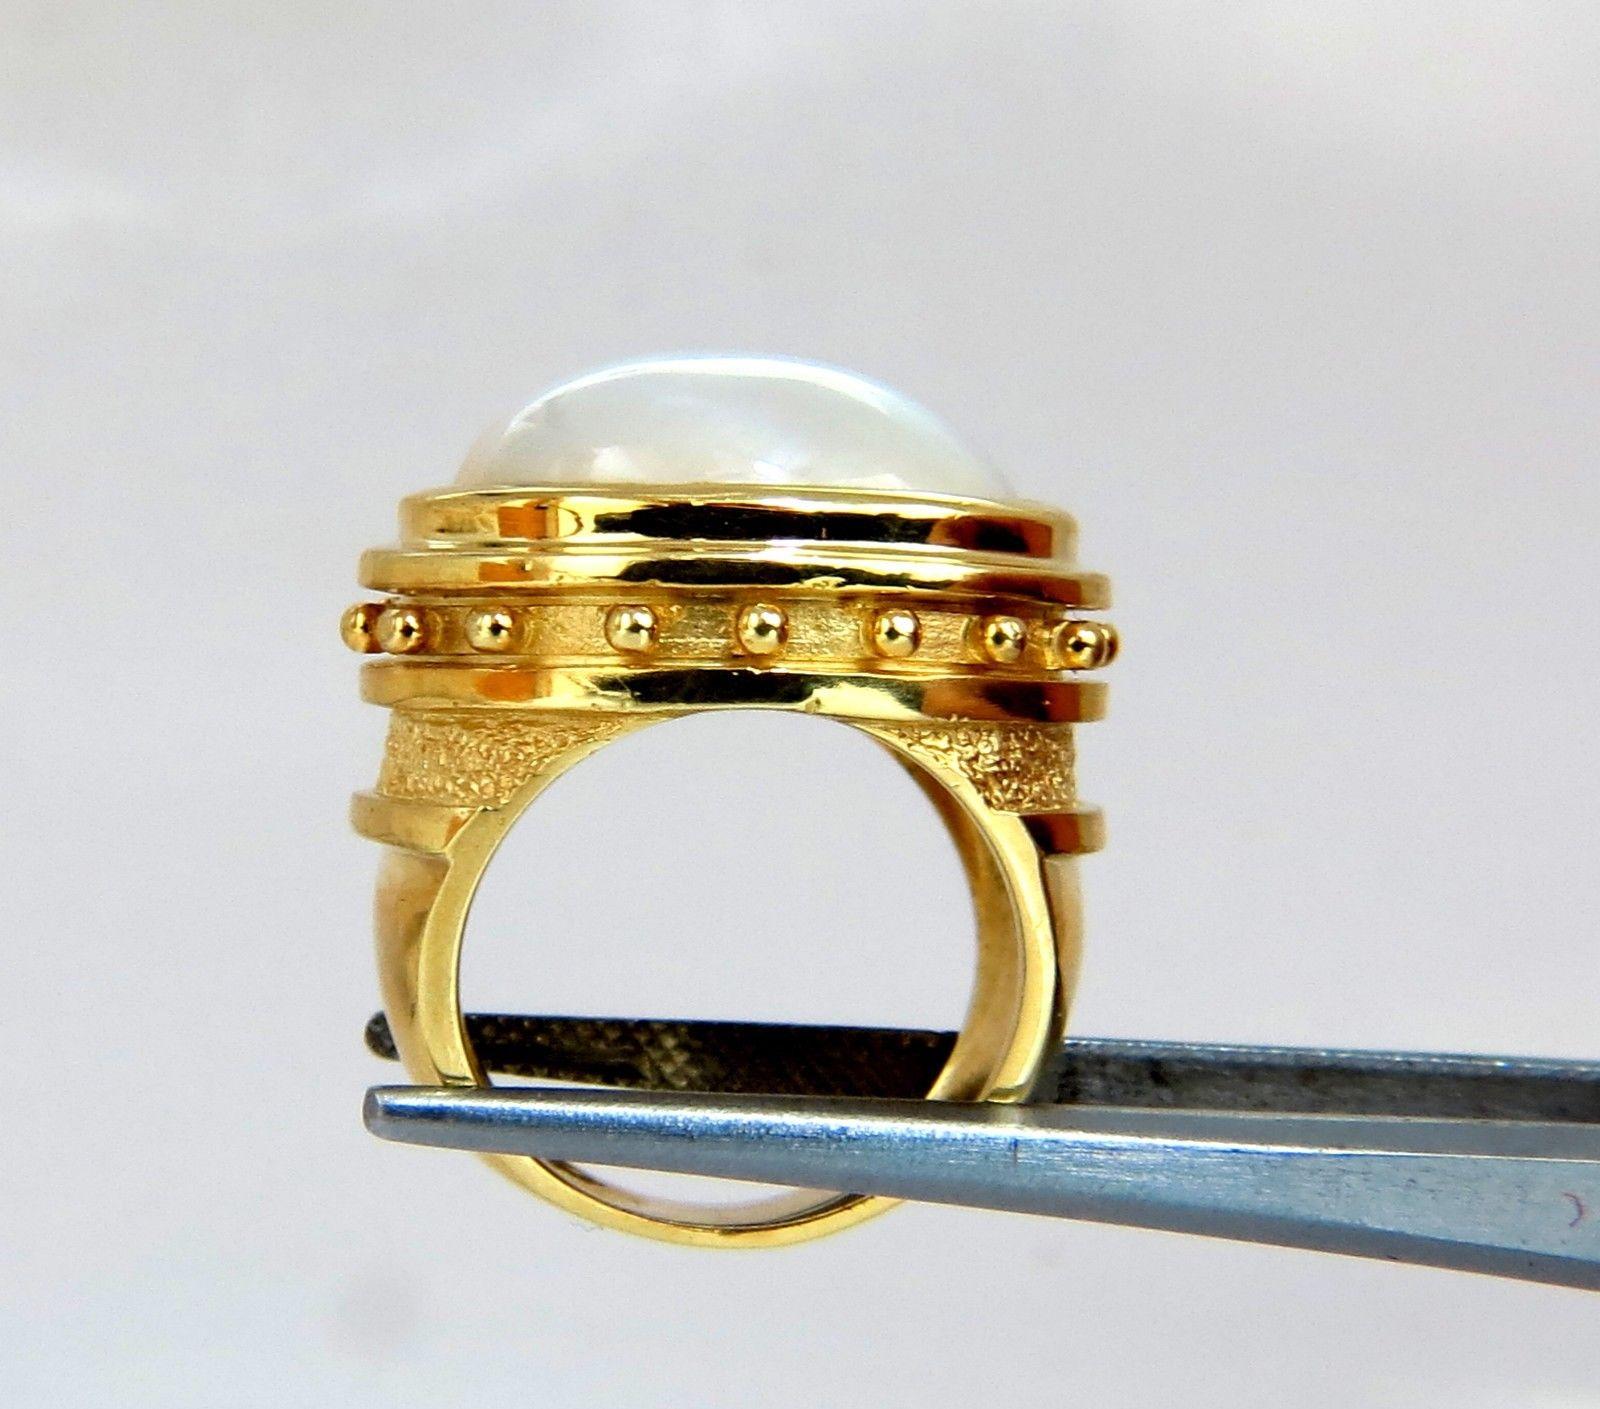 Designer: Aletto Bros.

16 x 12mm Mabe Pearl Ring

Stud Bead Girdle, Encircling Profile

Excellent detail.

14kt. yellow gold

15.7 grams.

Current ring size: 4.75

We may resize.

Depth of ring: 10.3mm

Deck of ring: 17 x 19mm